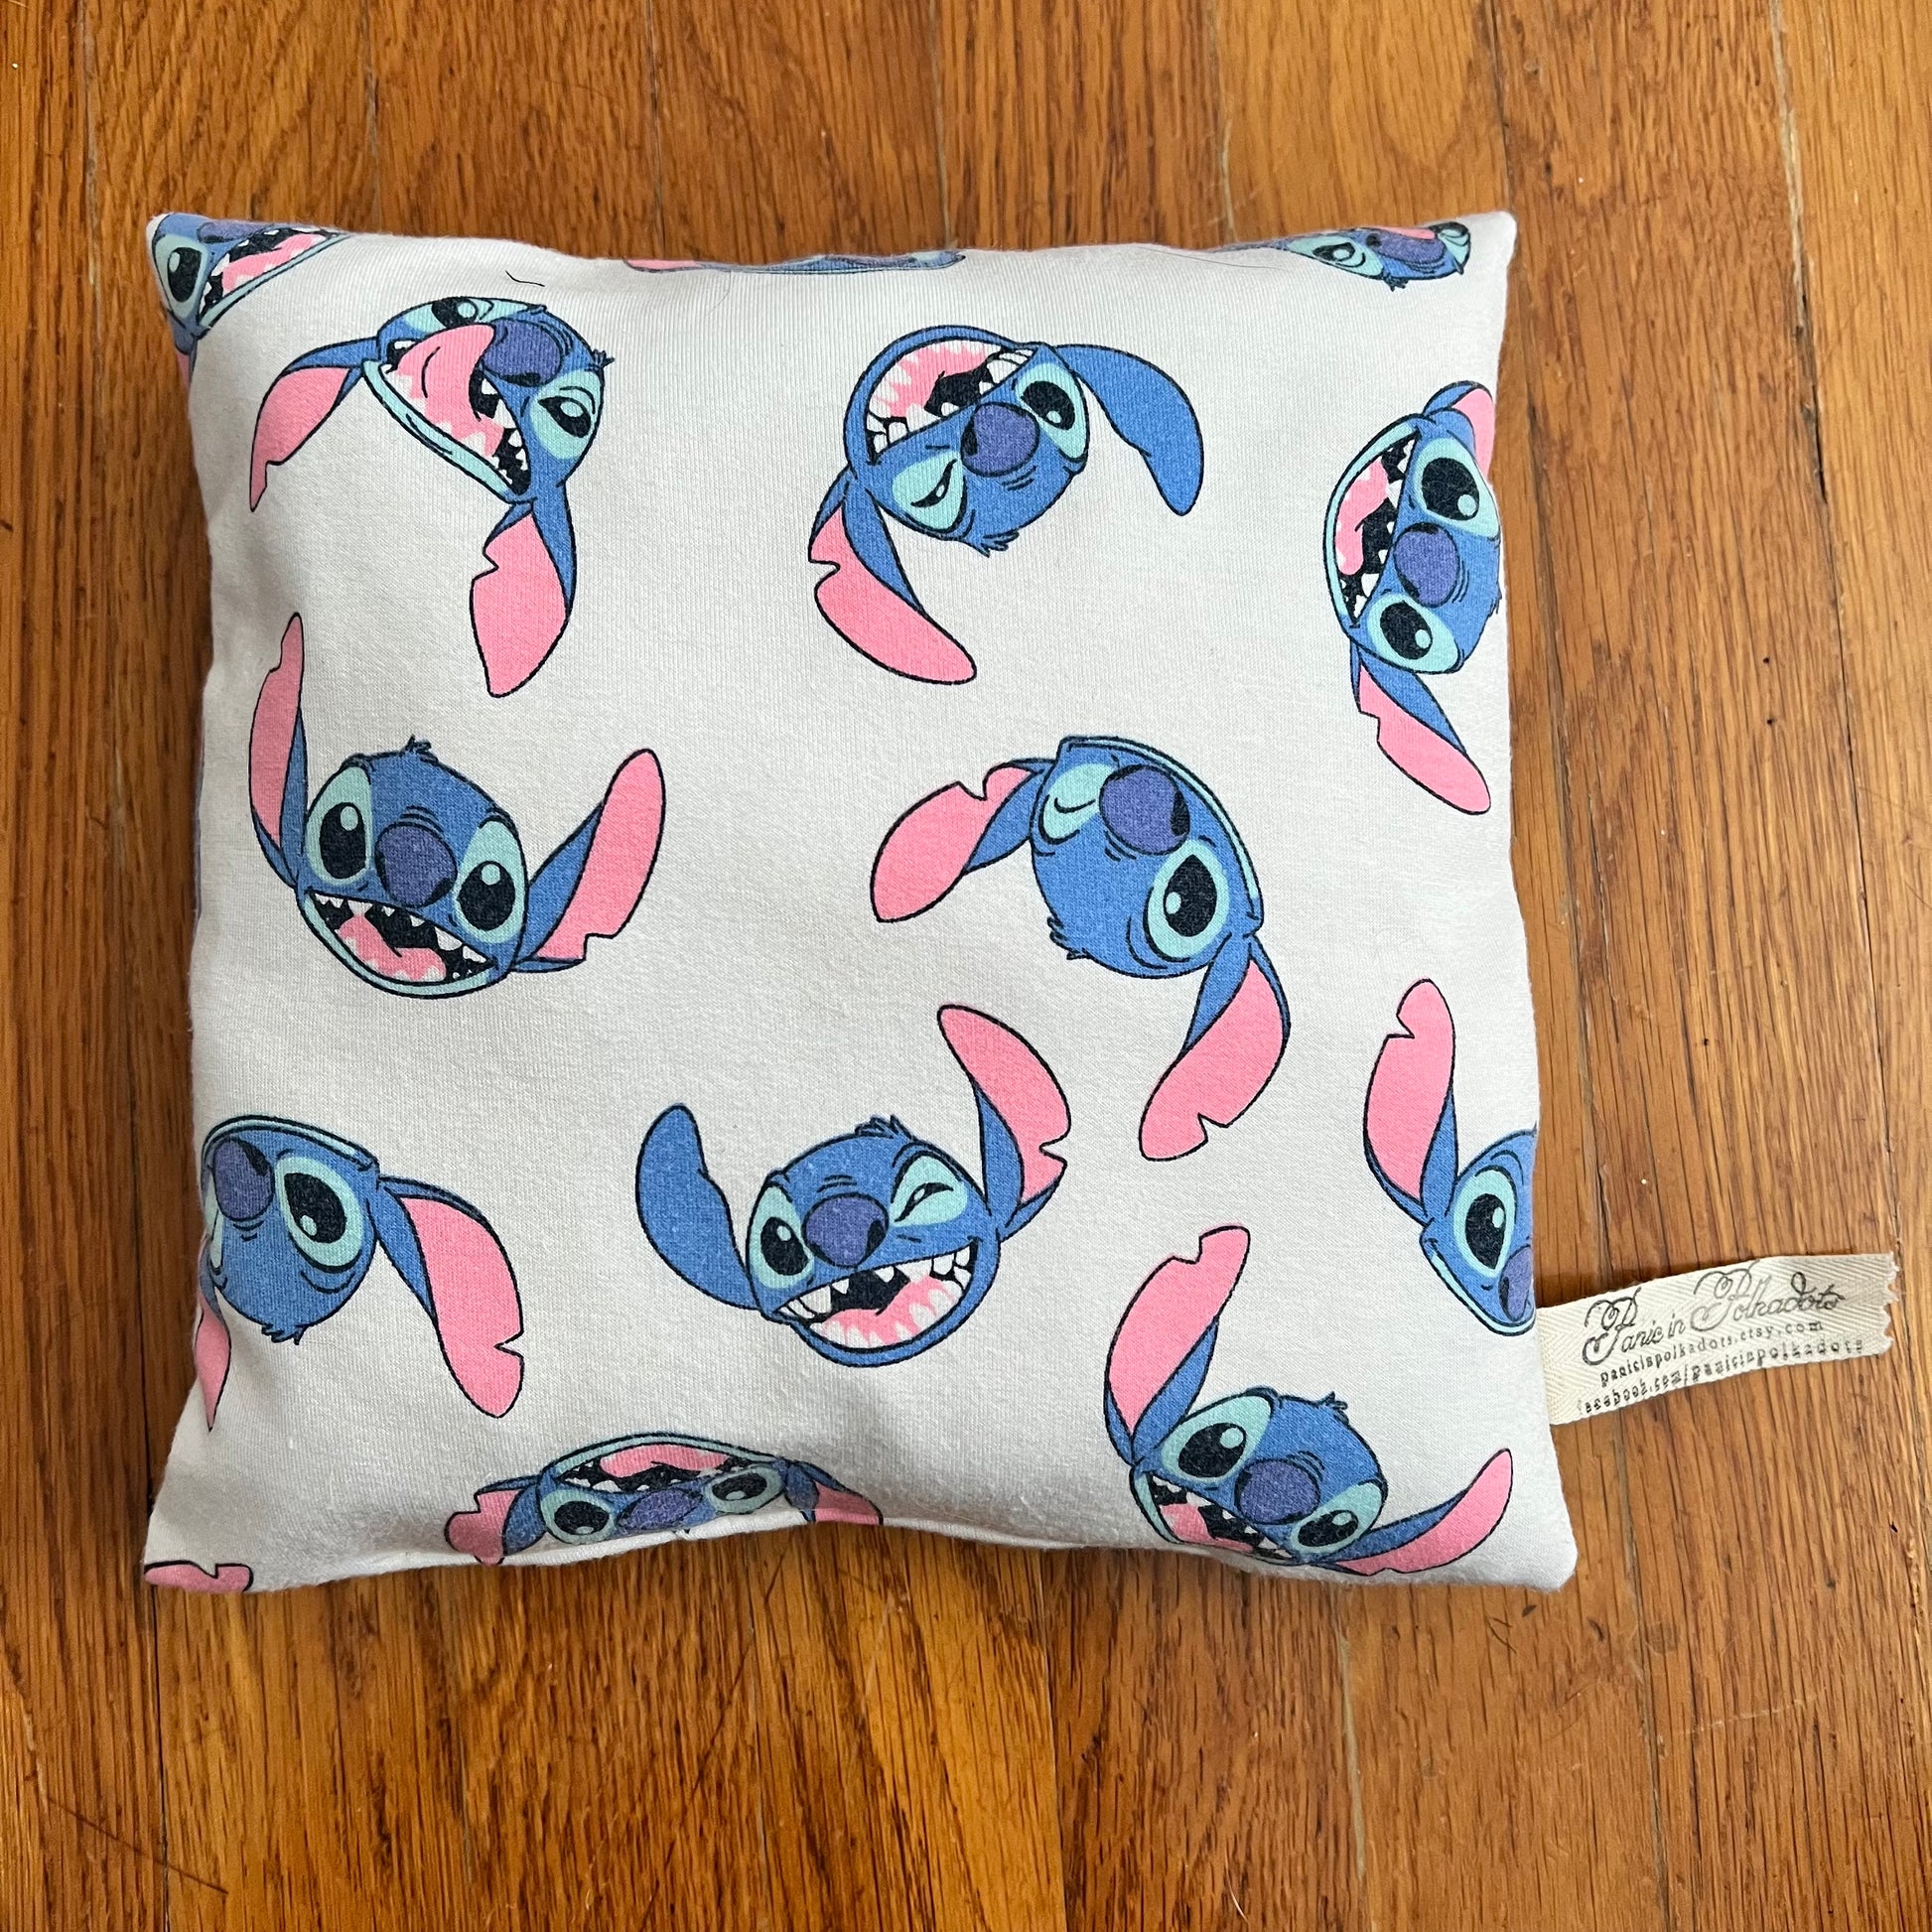 A little tooth fairy pillow featuring stitch from Lilo and stitch, aerial view against a wood background